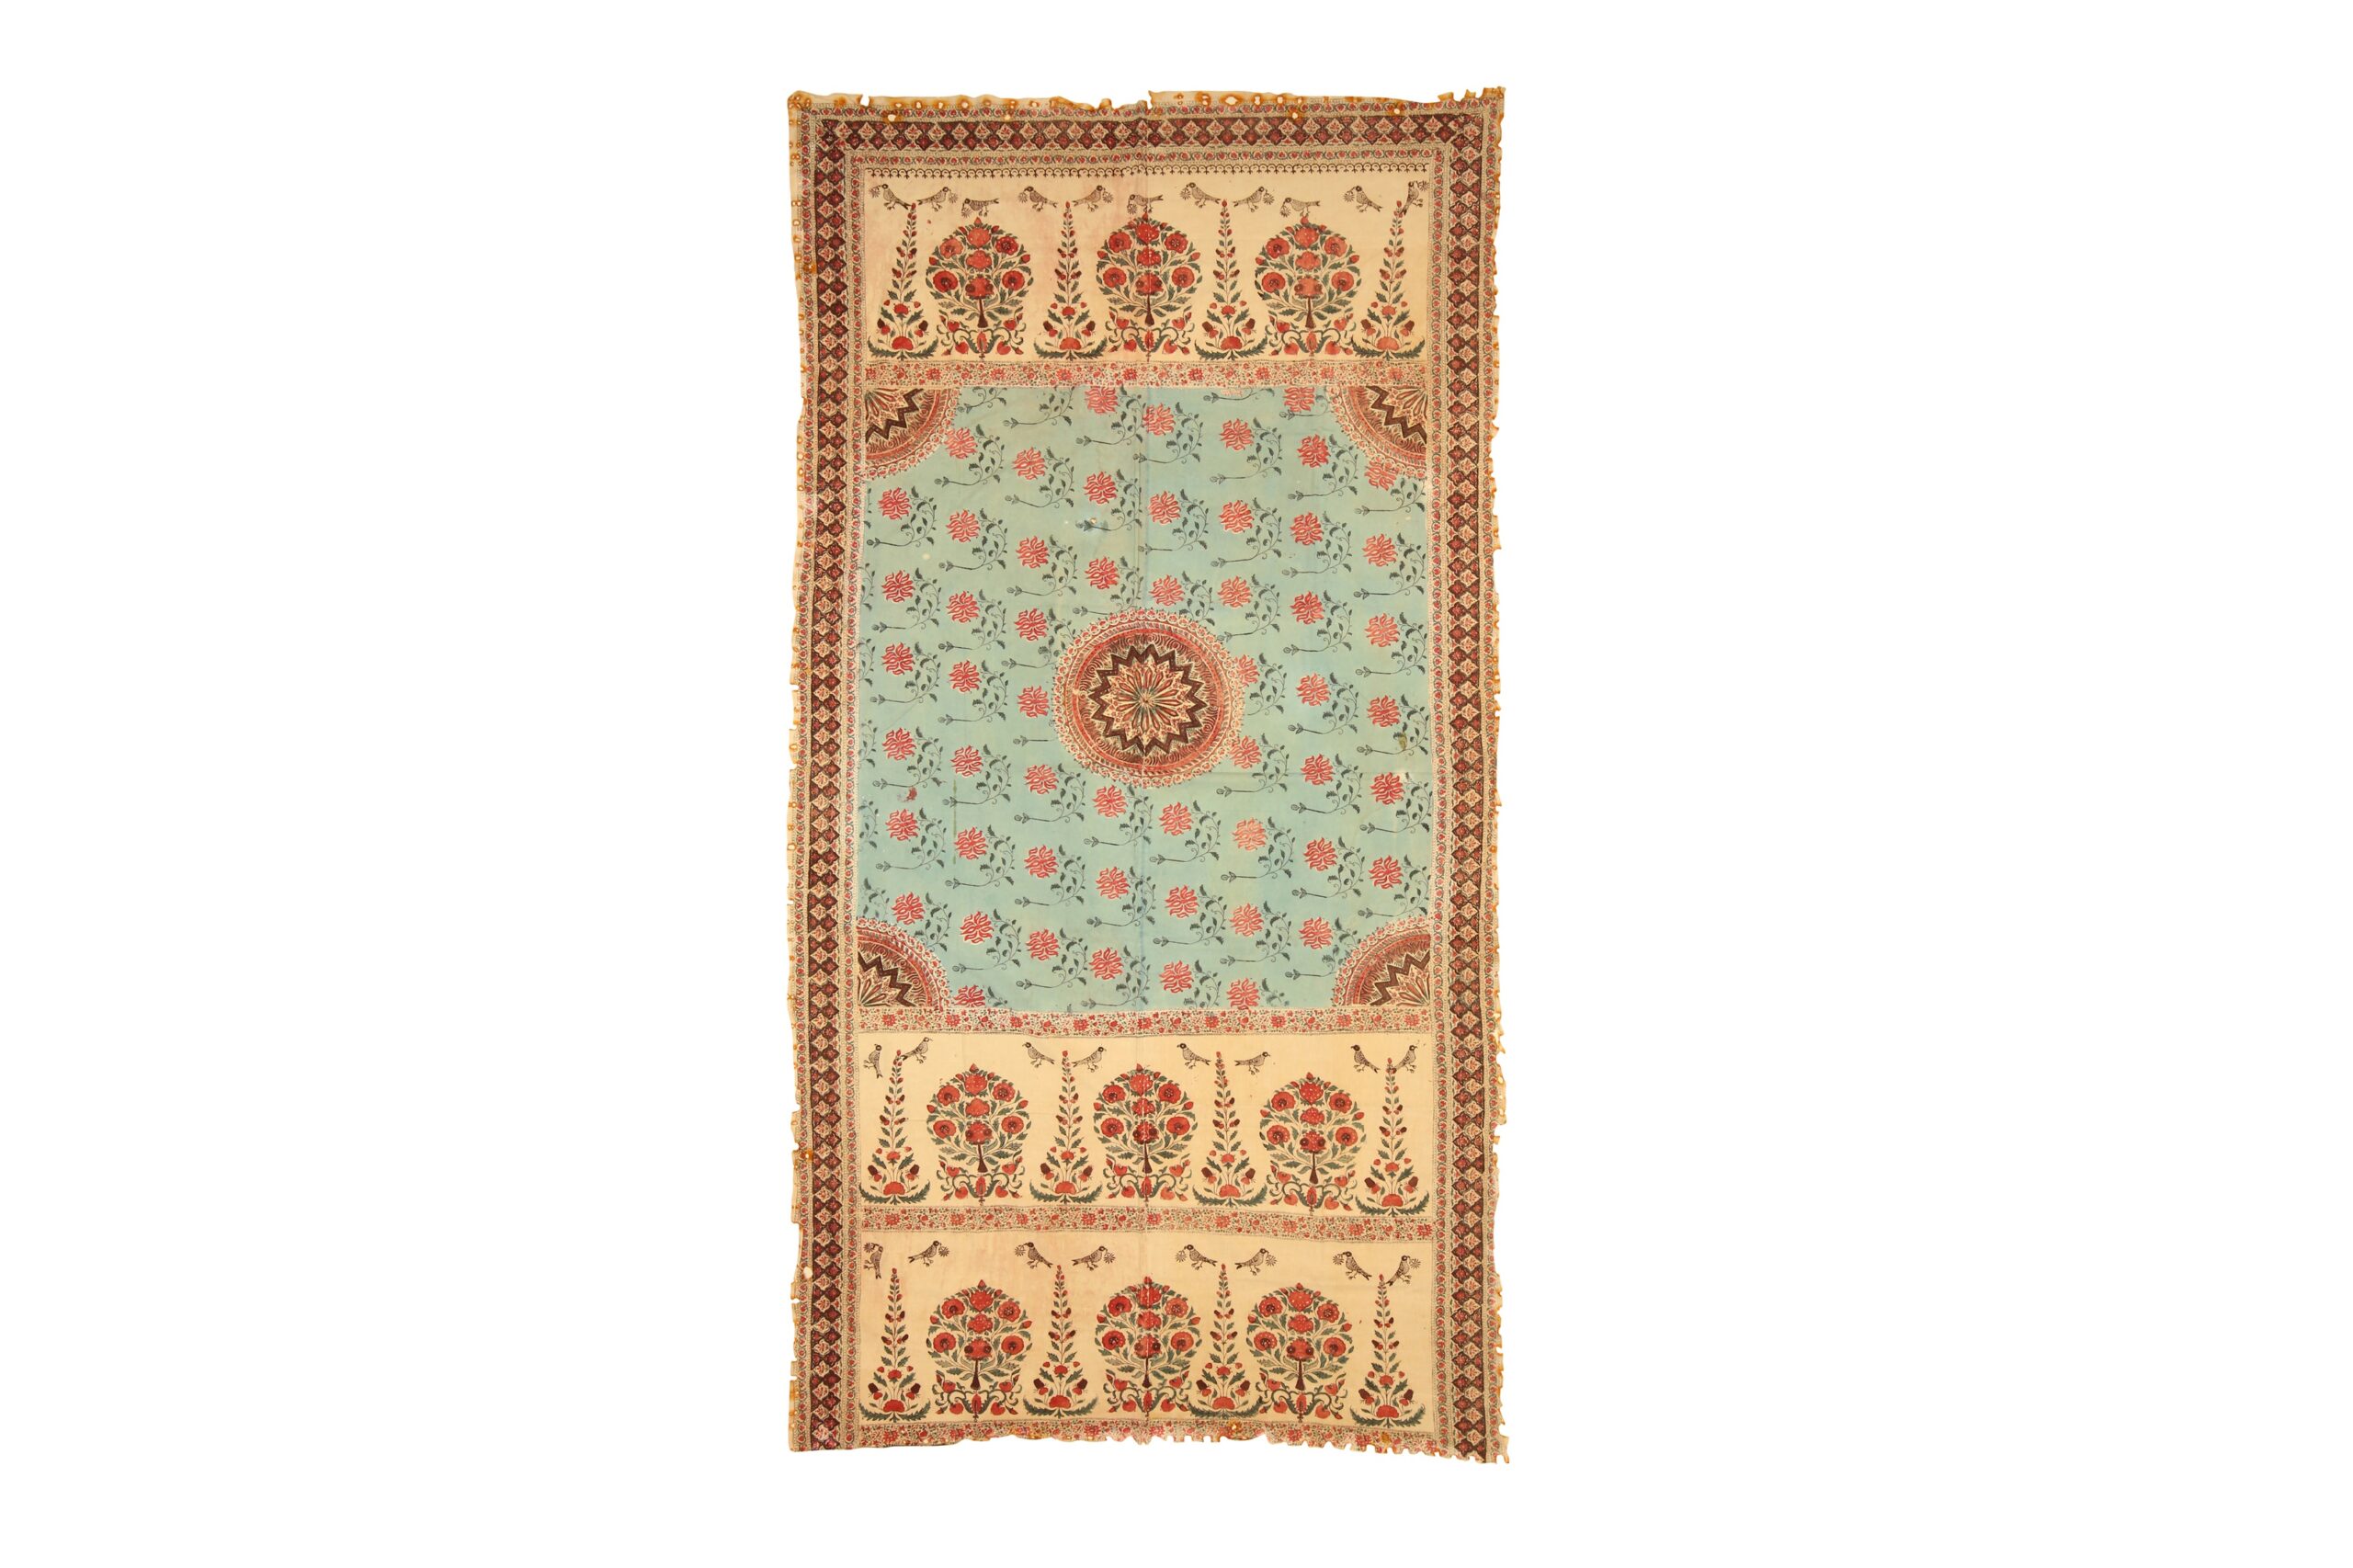 Lot 534. AN INDIAN CHINTZ COTTON HANGING North India, mid to late 19th century. Estimate £400 - £600